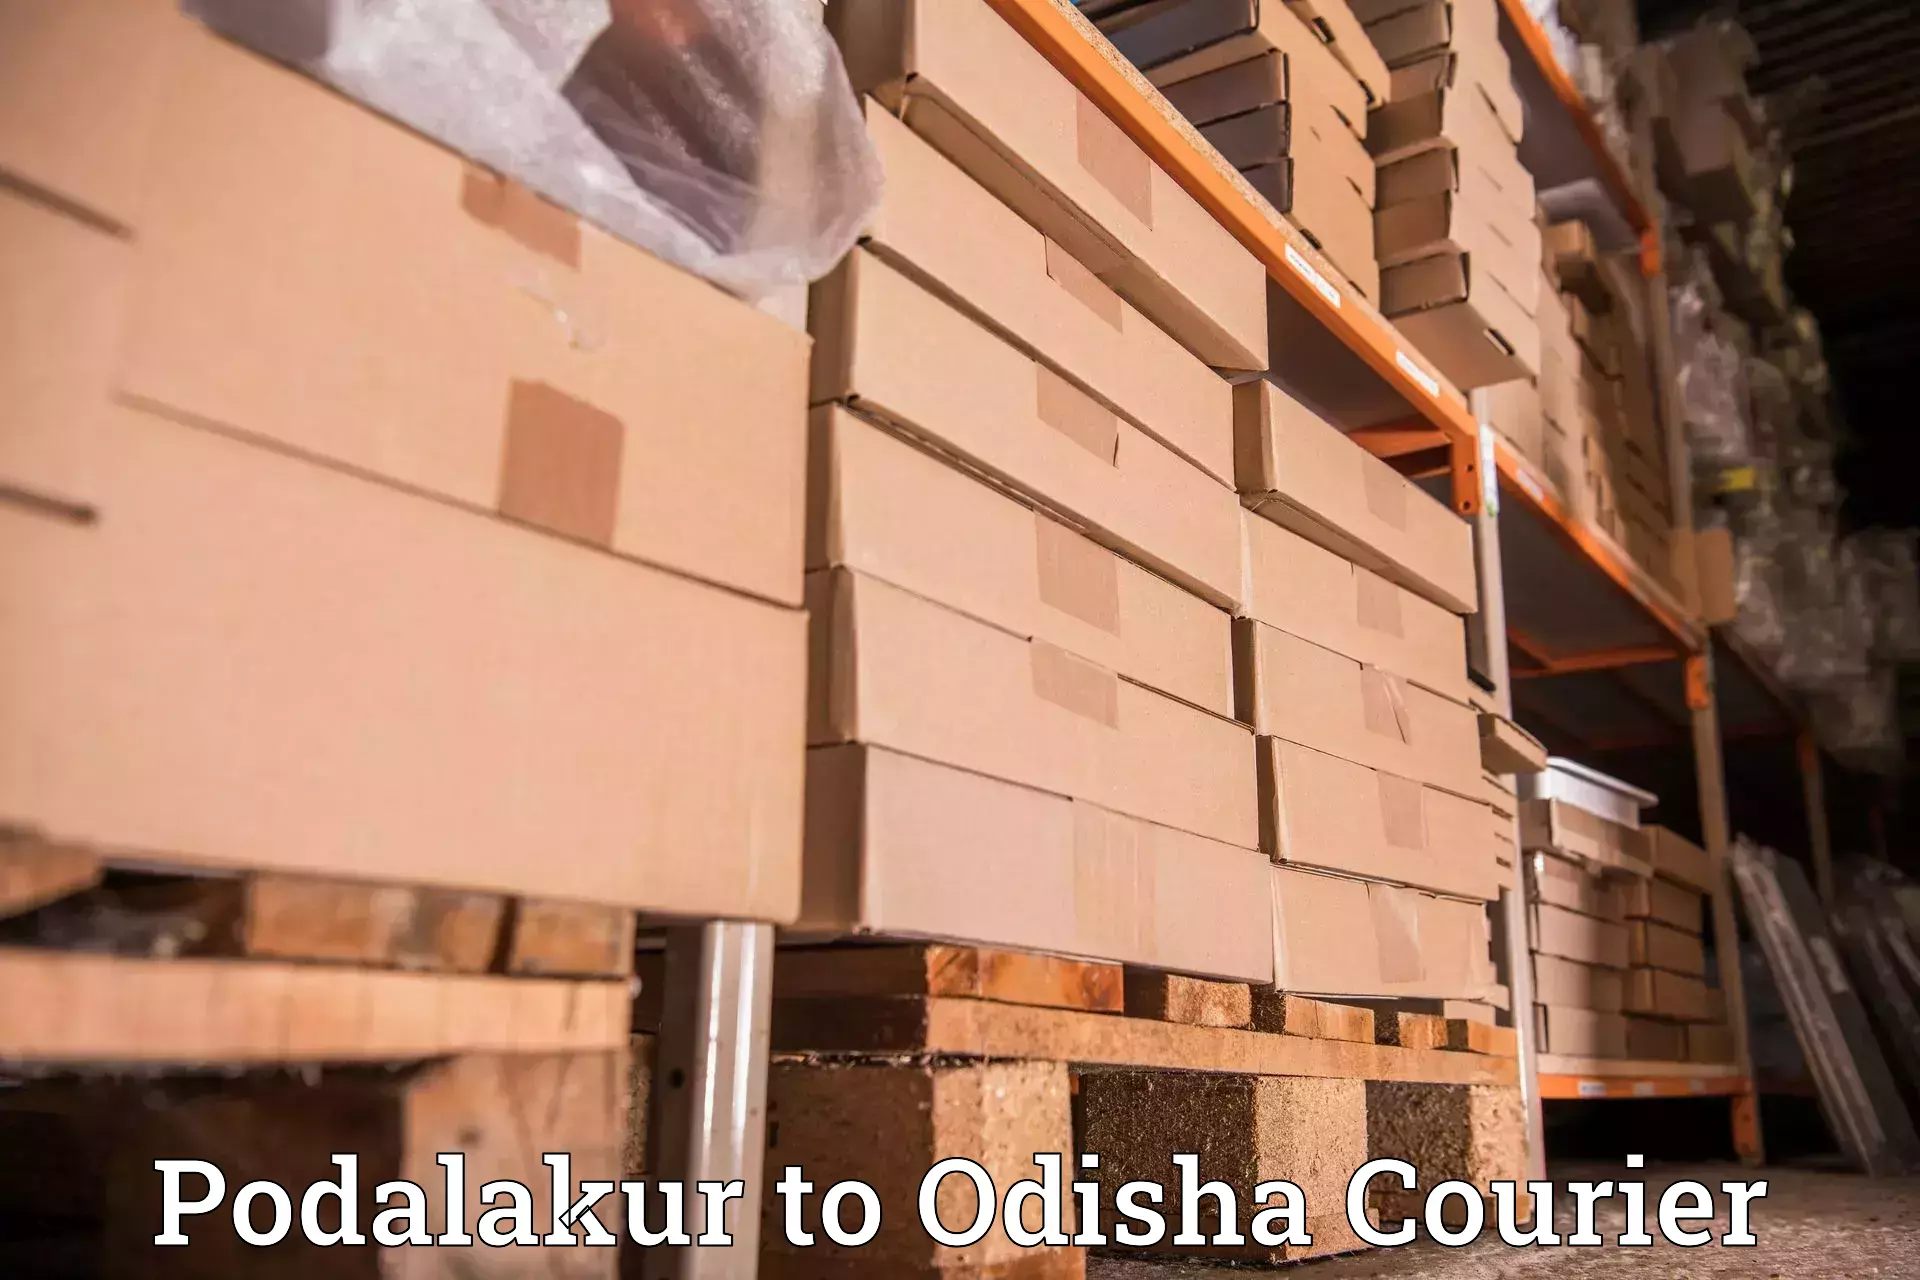 Flexible delivery schedules Podalakur to Sambalpur